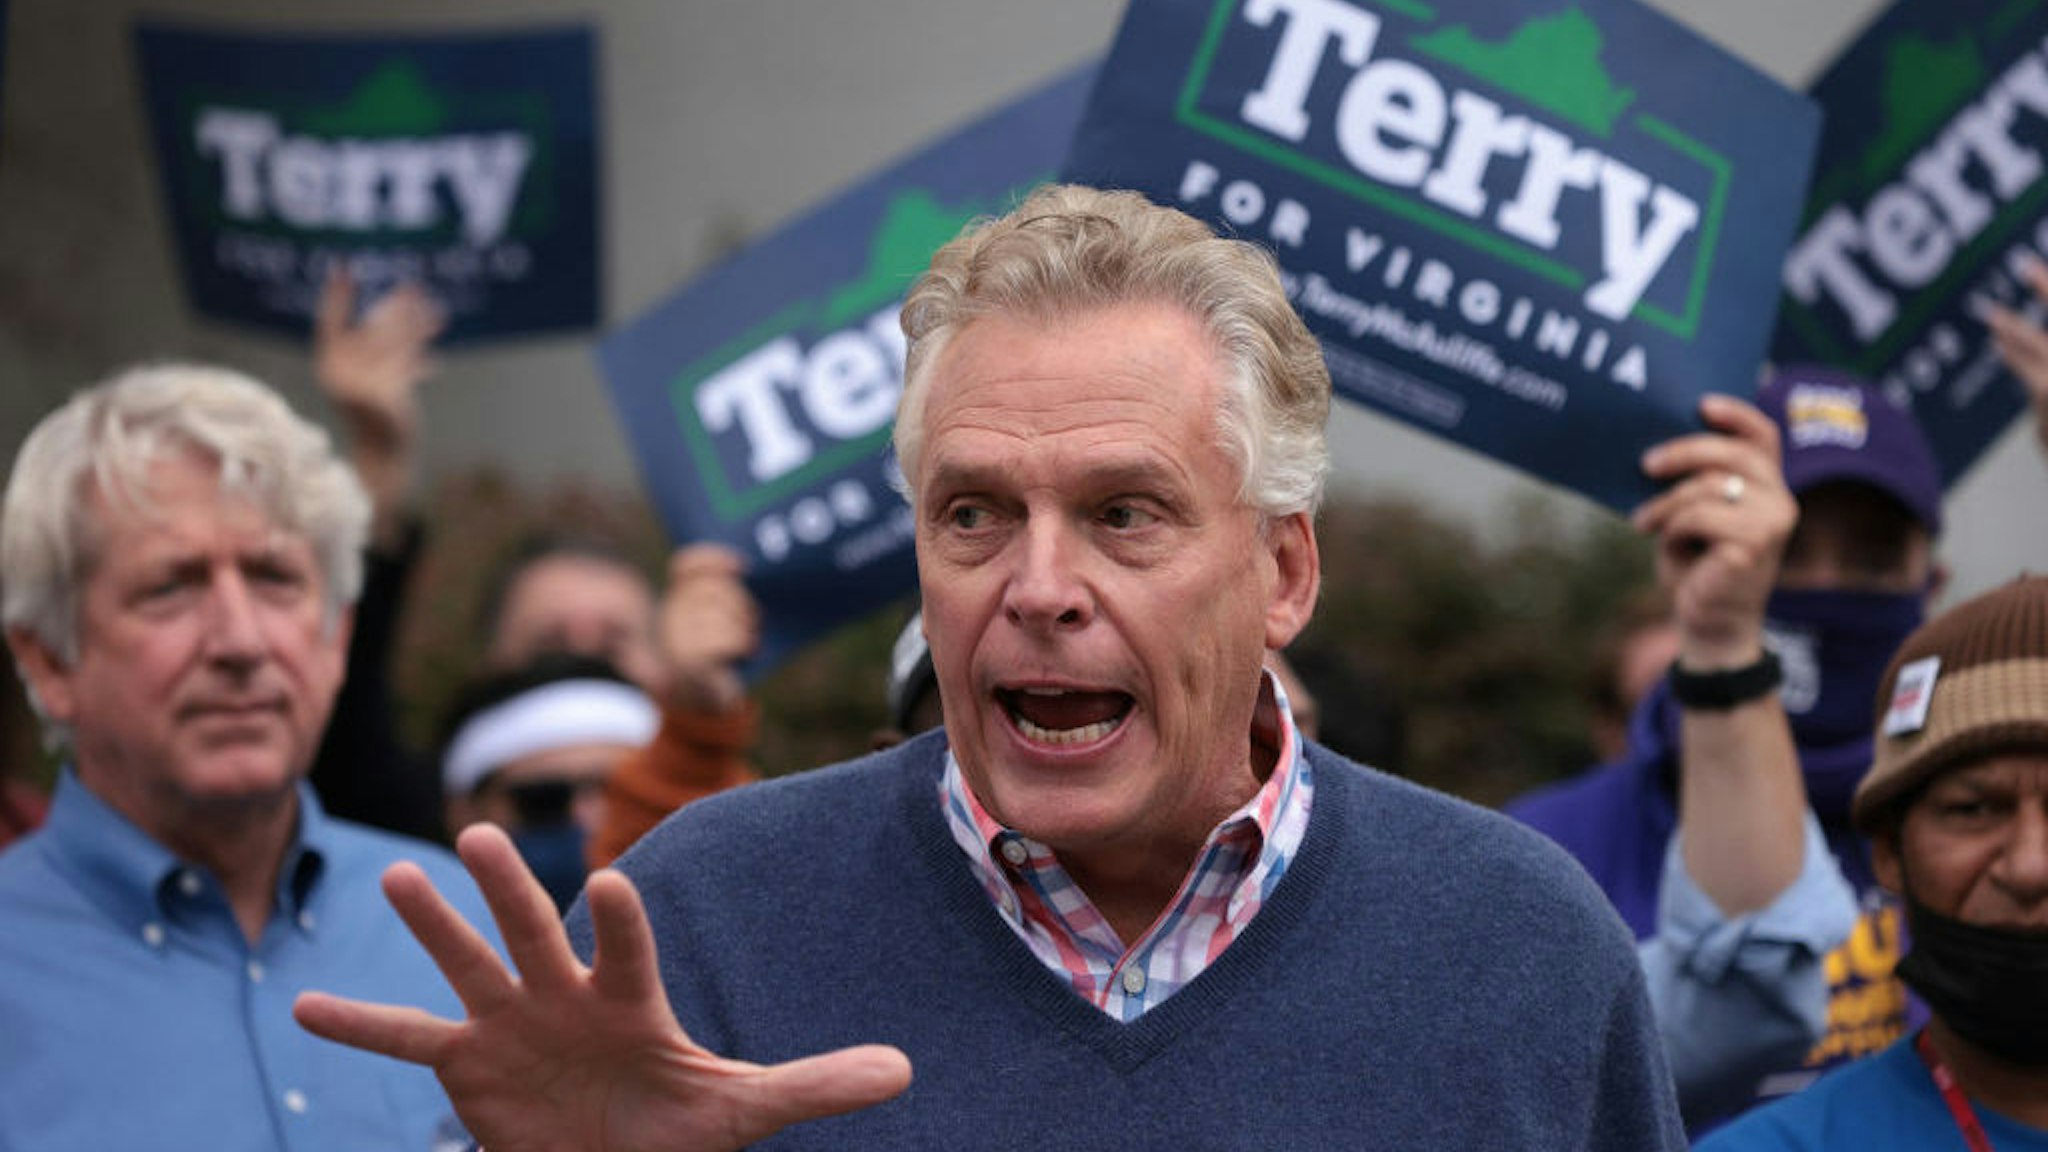 MANASSAS, VIRGINIA - OCTOBER 31: Democratic gubernatorial candidate, former Virginia Gov. Terry McAuliffe speaks to supporters at a Canvass Launch rally October 31, 2021 in Manassas, Virginia. The Virginia gubernatorial election, pitting McAuliffe against Republican candidate Glenn Youngkin, is November 2. (Photo by Win McNamee/Getty Images)